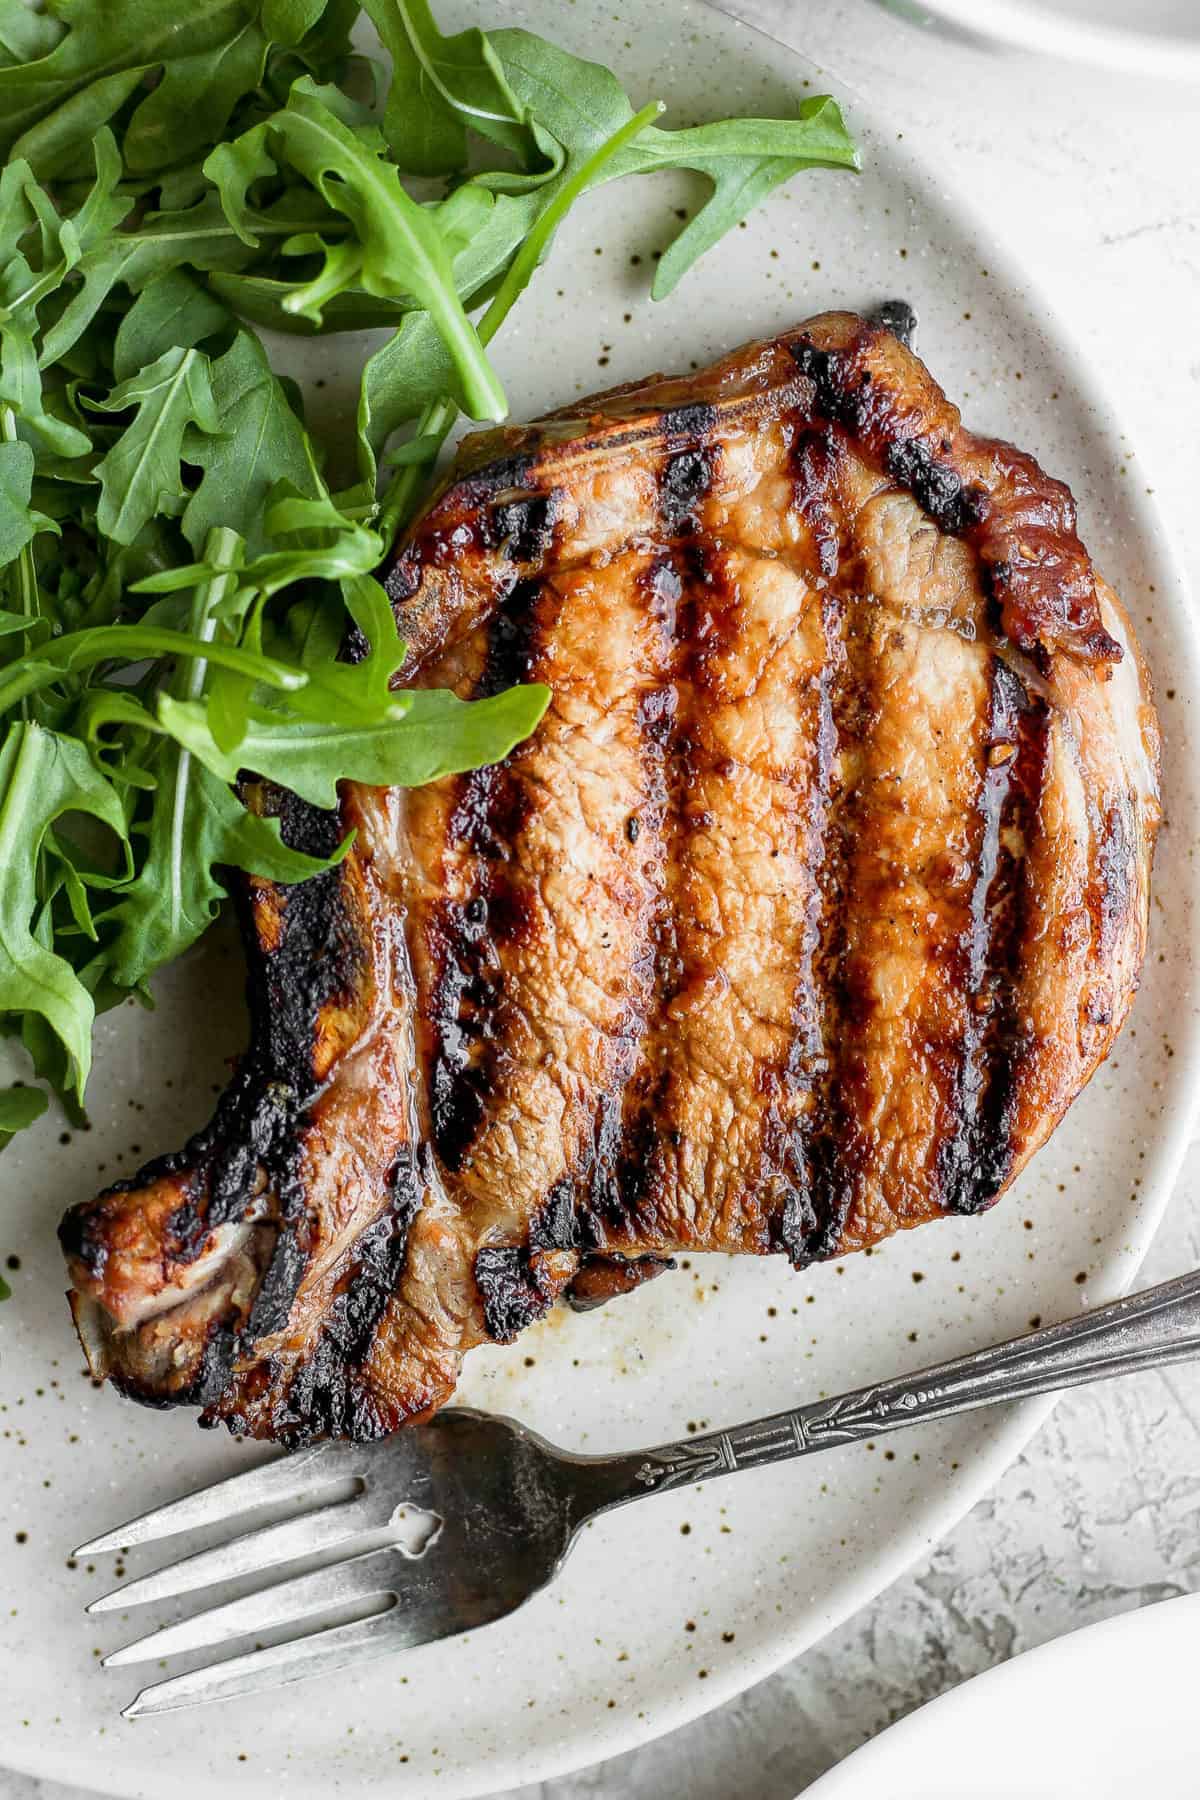 https://fitfoodiefinds.com/wp-content/uploads/2021/07/grilled-pork-chops-10-scaled.jpg